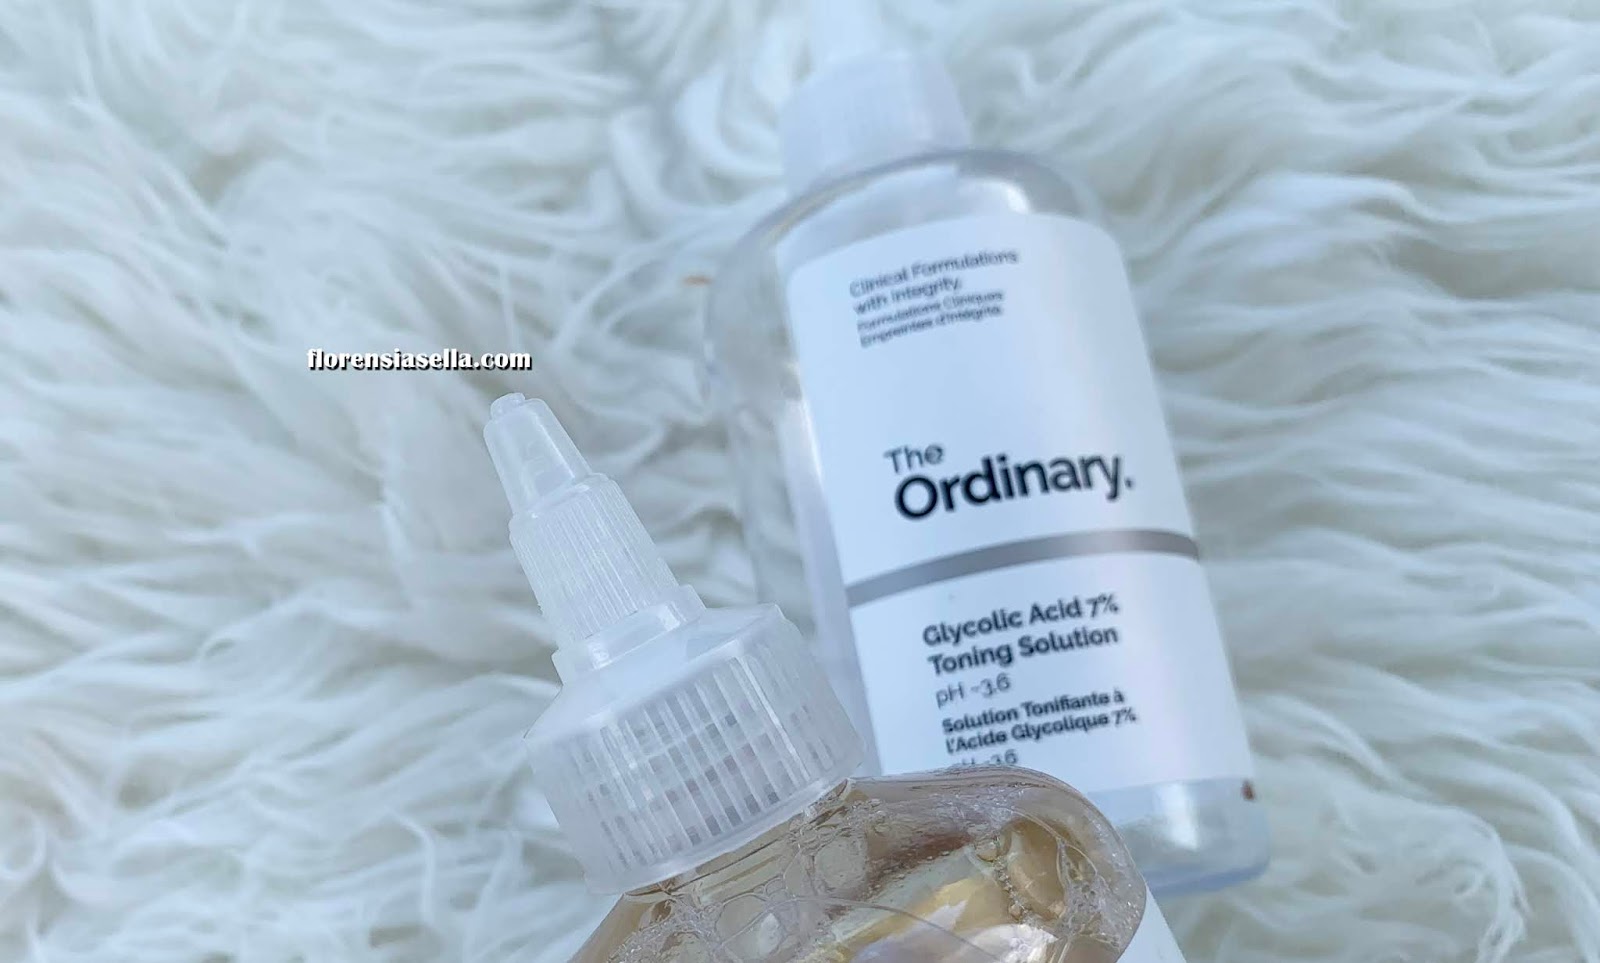 The ordinary toning solution. The ordinary код. The ordinary код на упаковке. Glycolic acid 7% Toning solution.